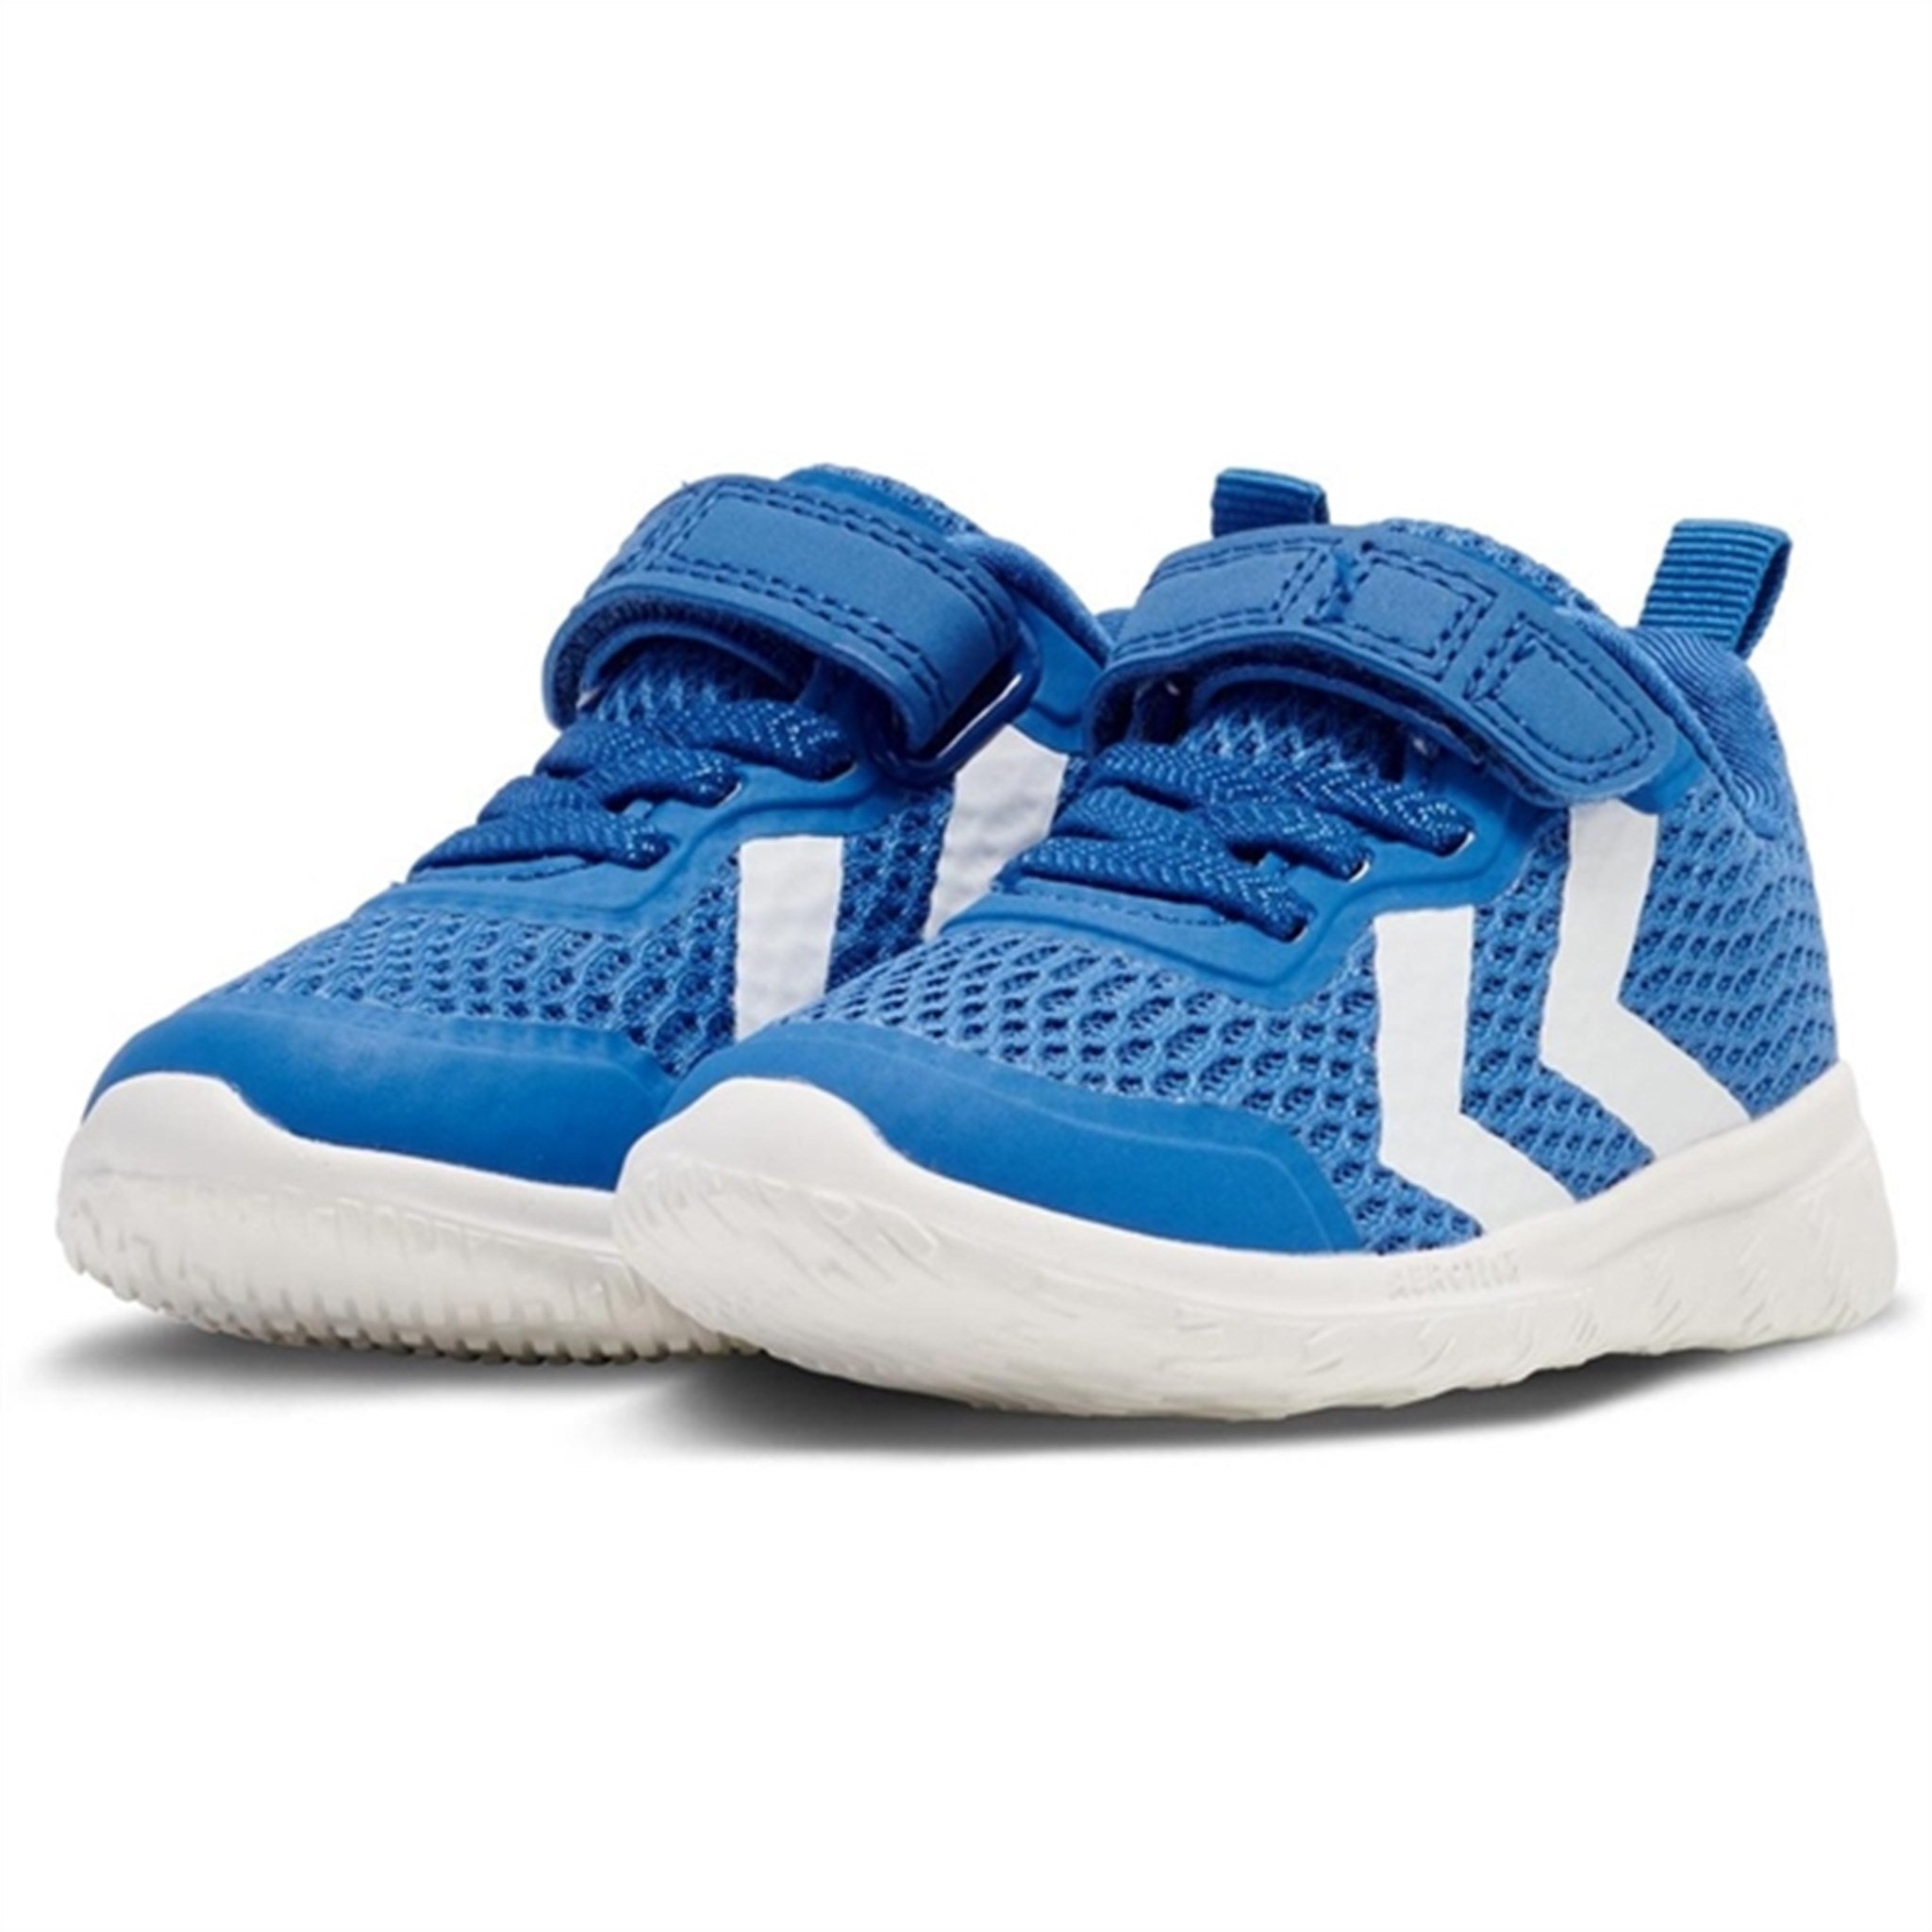 Hummel Blue/White Actus Recycled Infant Sneakers Blue/White 2